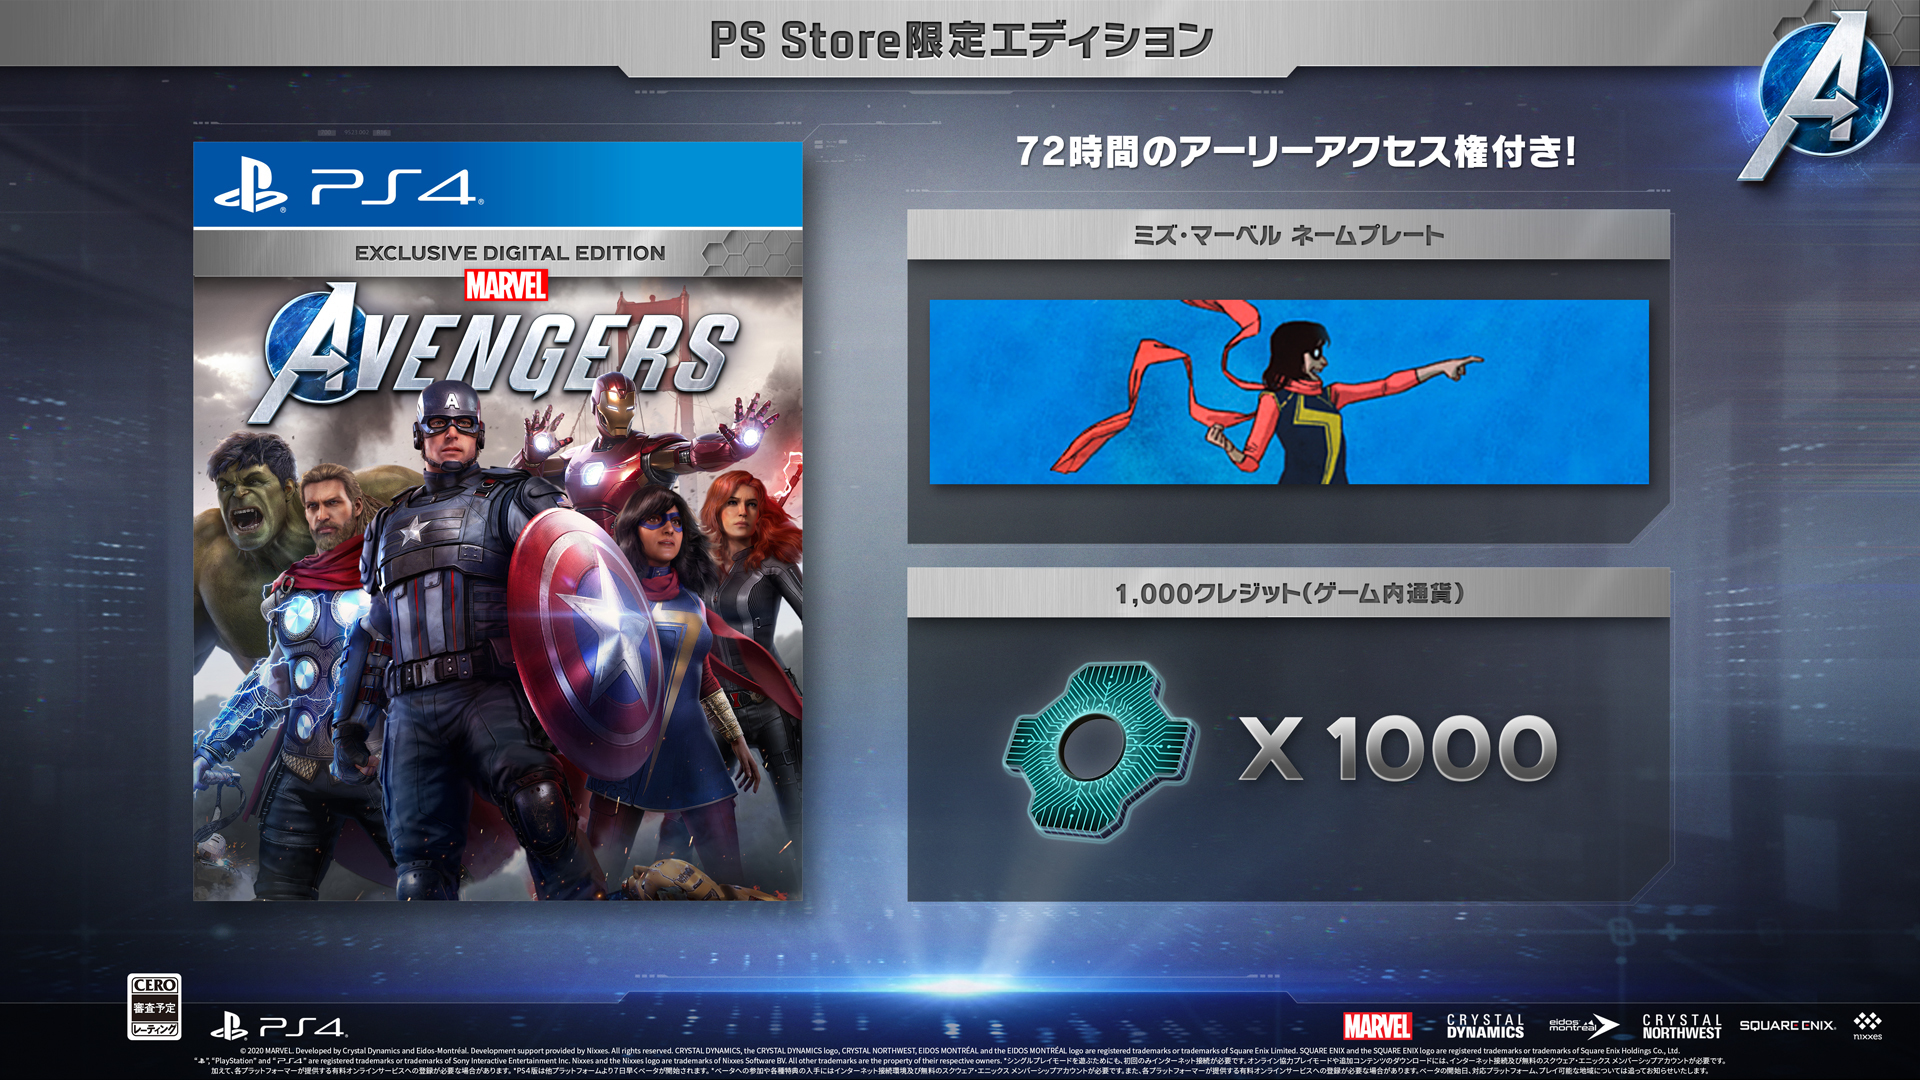 PSストア限定エディション C)2020 MARVEL. Developed by Crystal Dynamics and Eidos Montréal. Development support provided by Nixxes. All rights reserved.